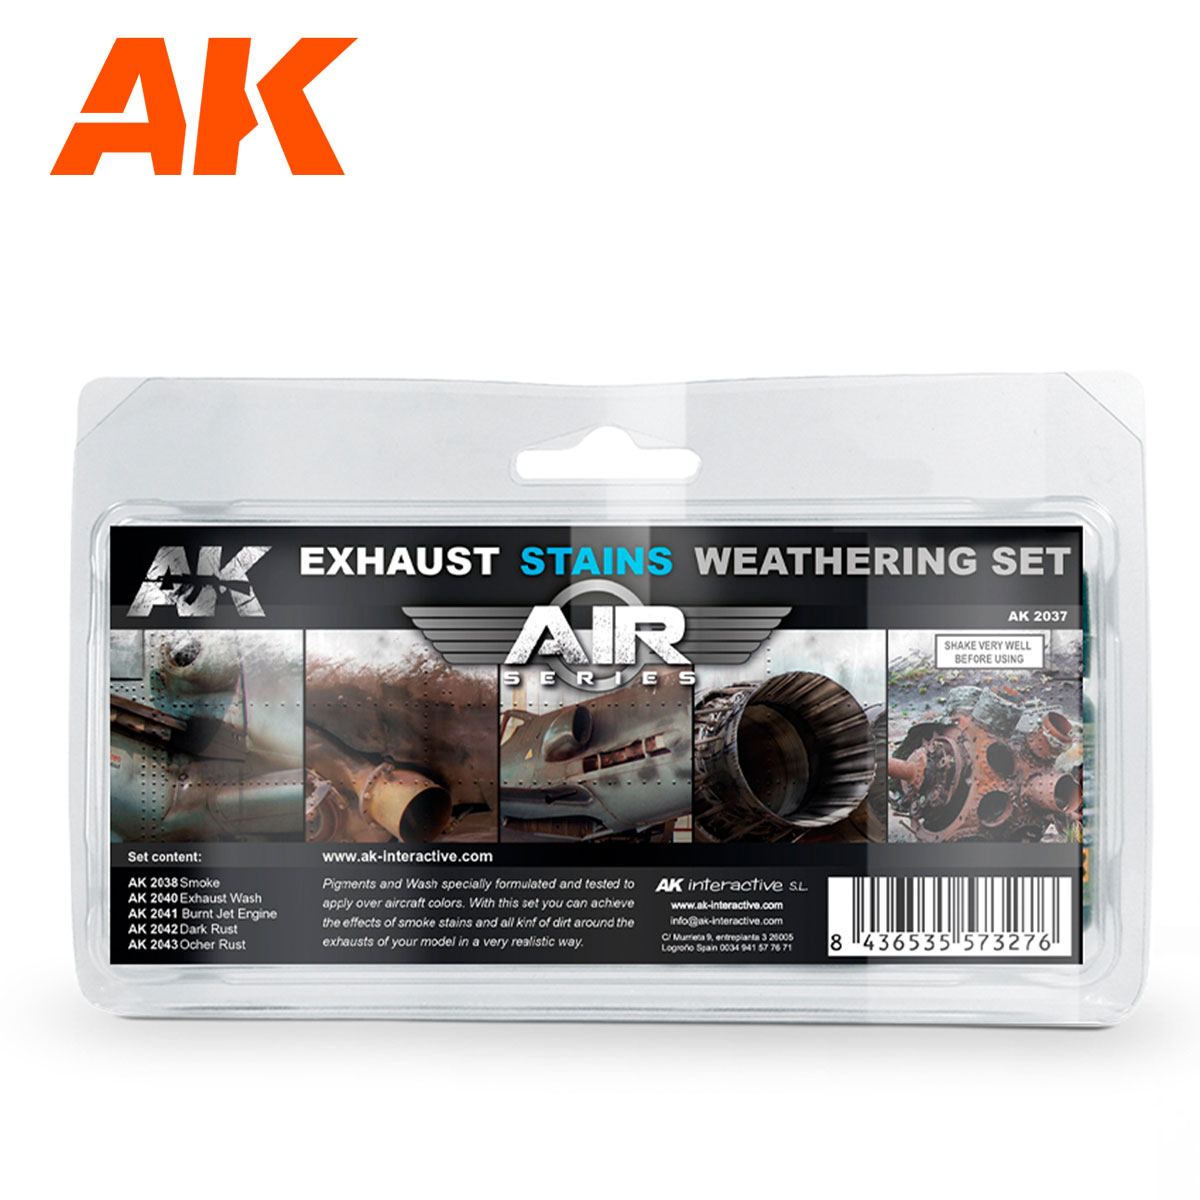 Buy Exhaust Stains Weathering Set (Air Series) online for 18,75€